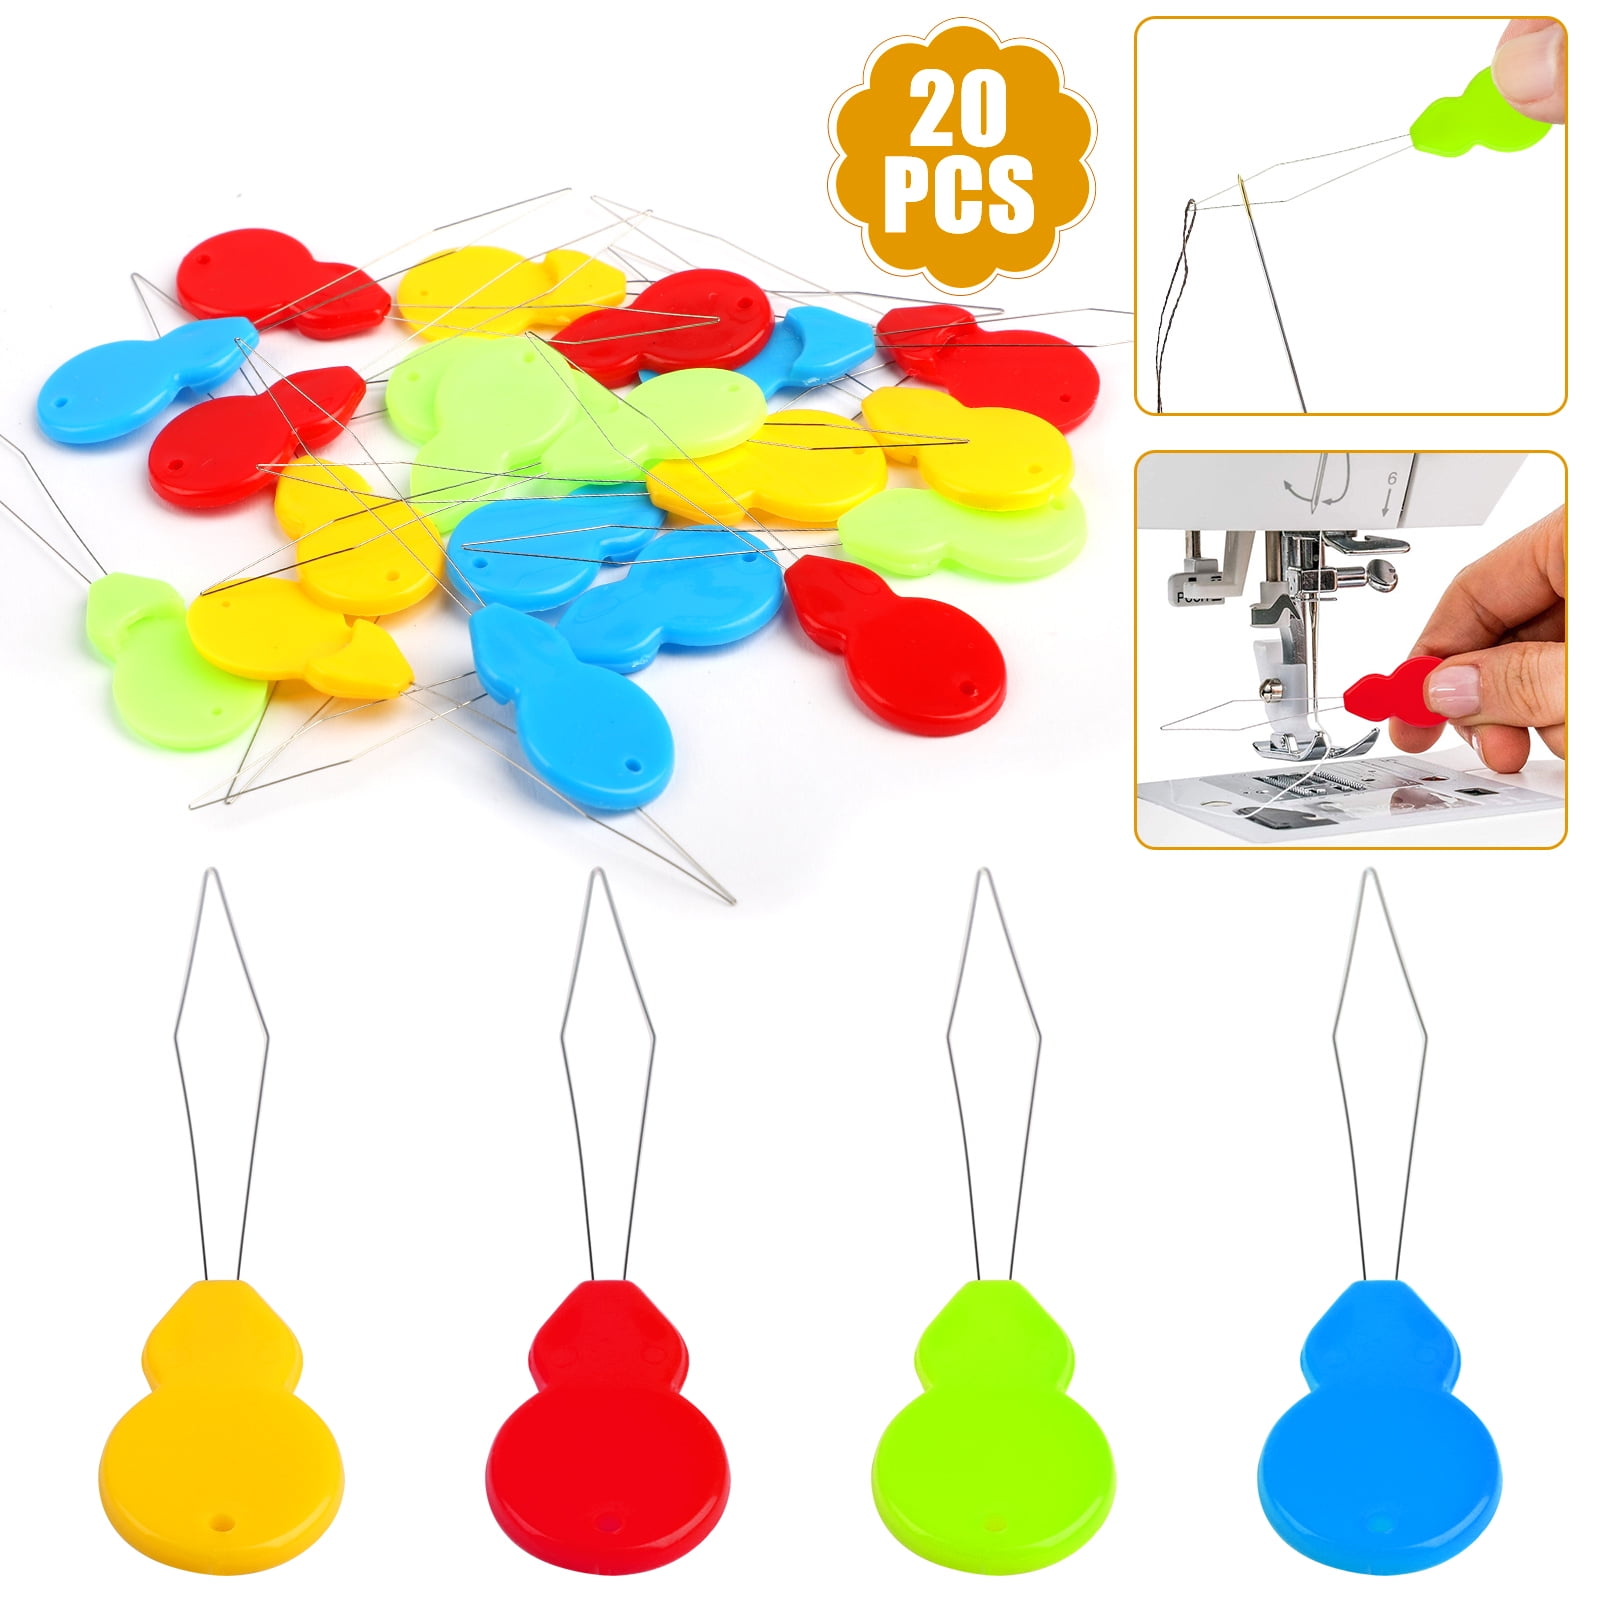 20pcs Needle Threaders, CELECTIGO Durable Household Sewing Tools, Gourd  Shaped Plastic Wire Loop DIY Needle Threader Hand Machine Sewing Tool for